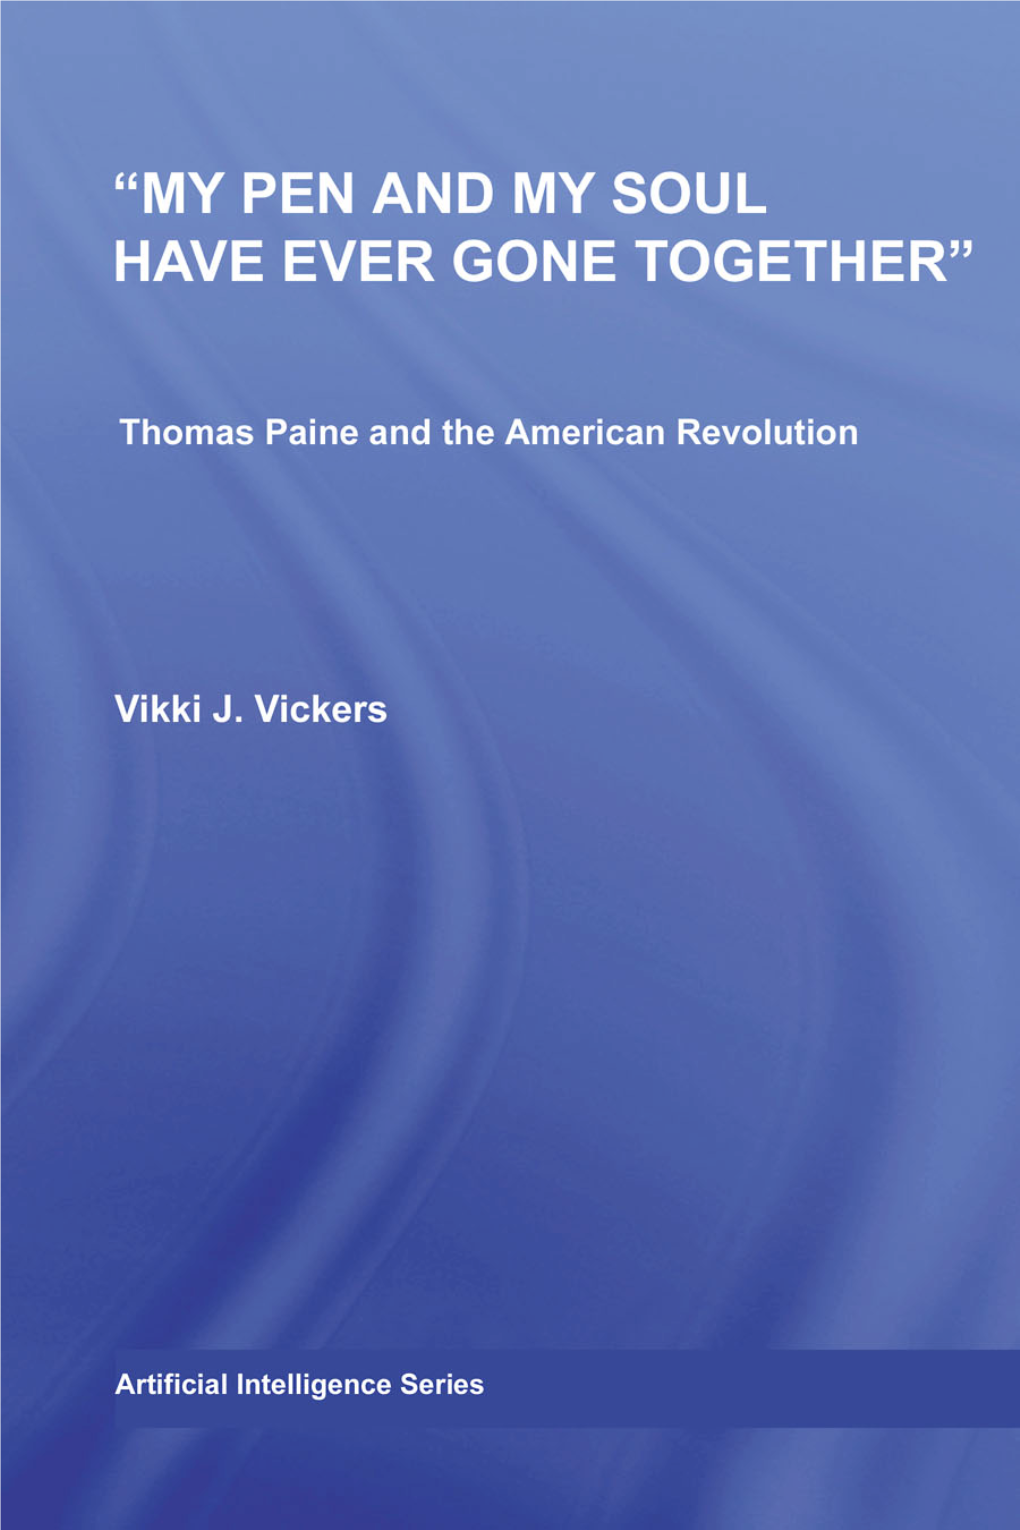 Thomas Paine and the American Revolution Vikki J.Vickers “MY PEN and MY SOUL HAVE EVER GONE TOGETHER” Thomas Paine and the American Revolution